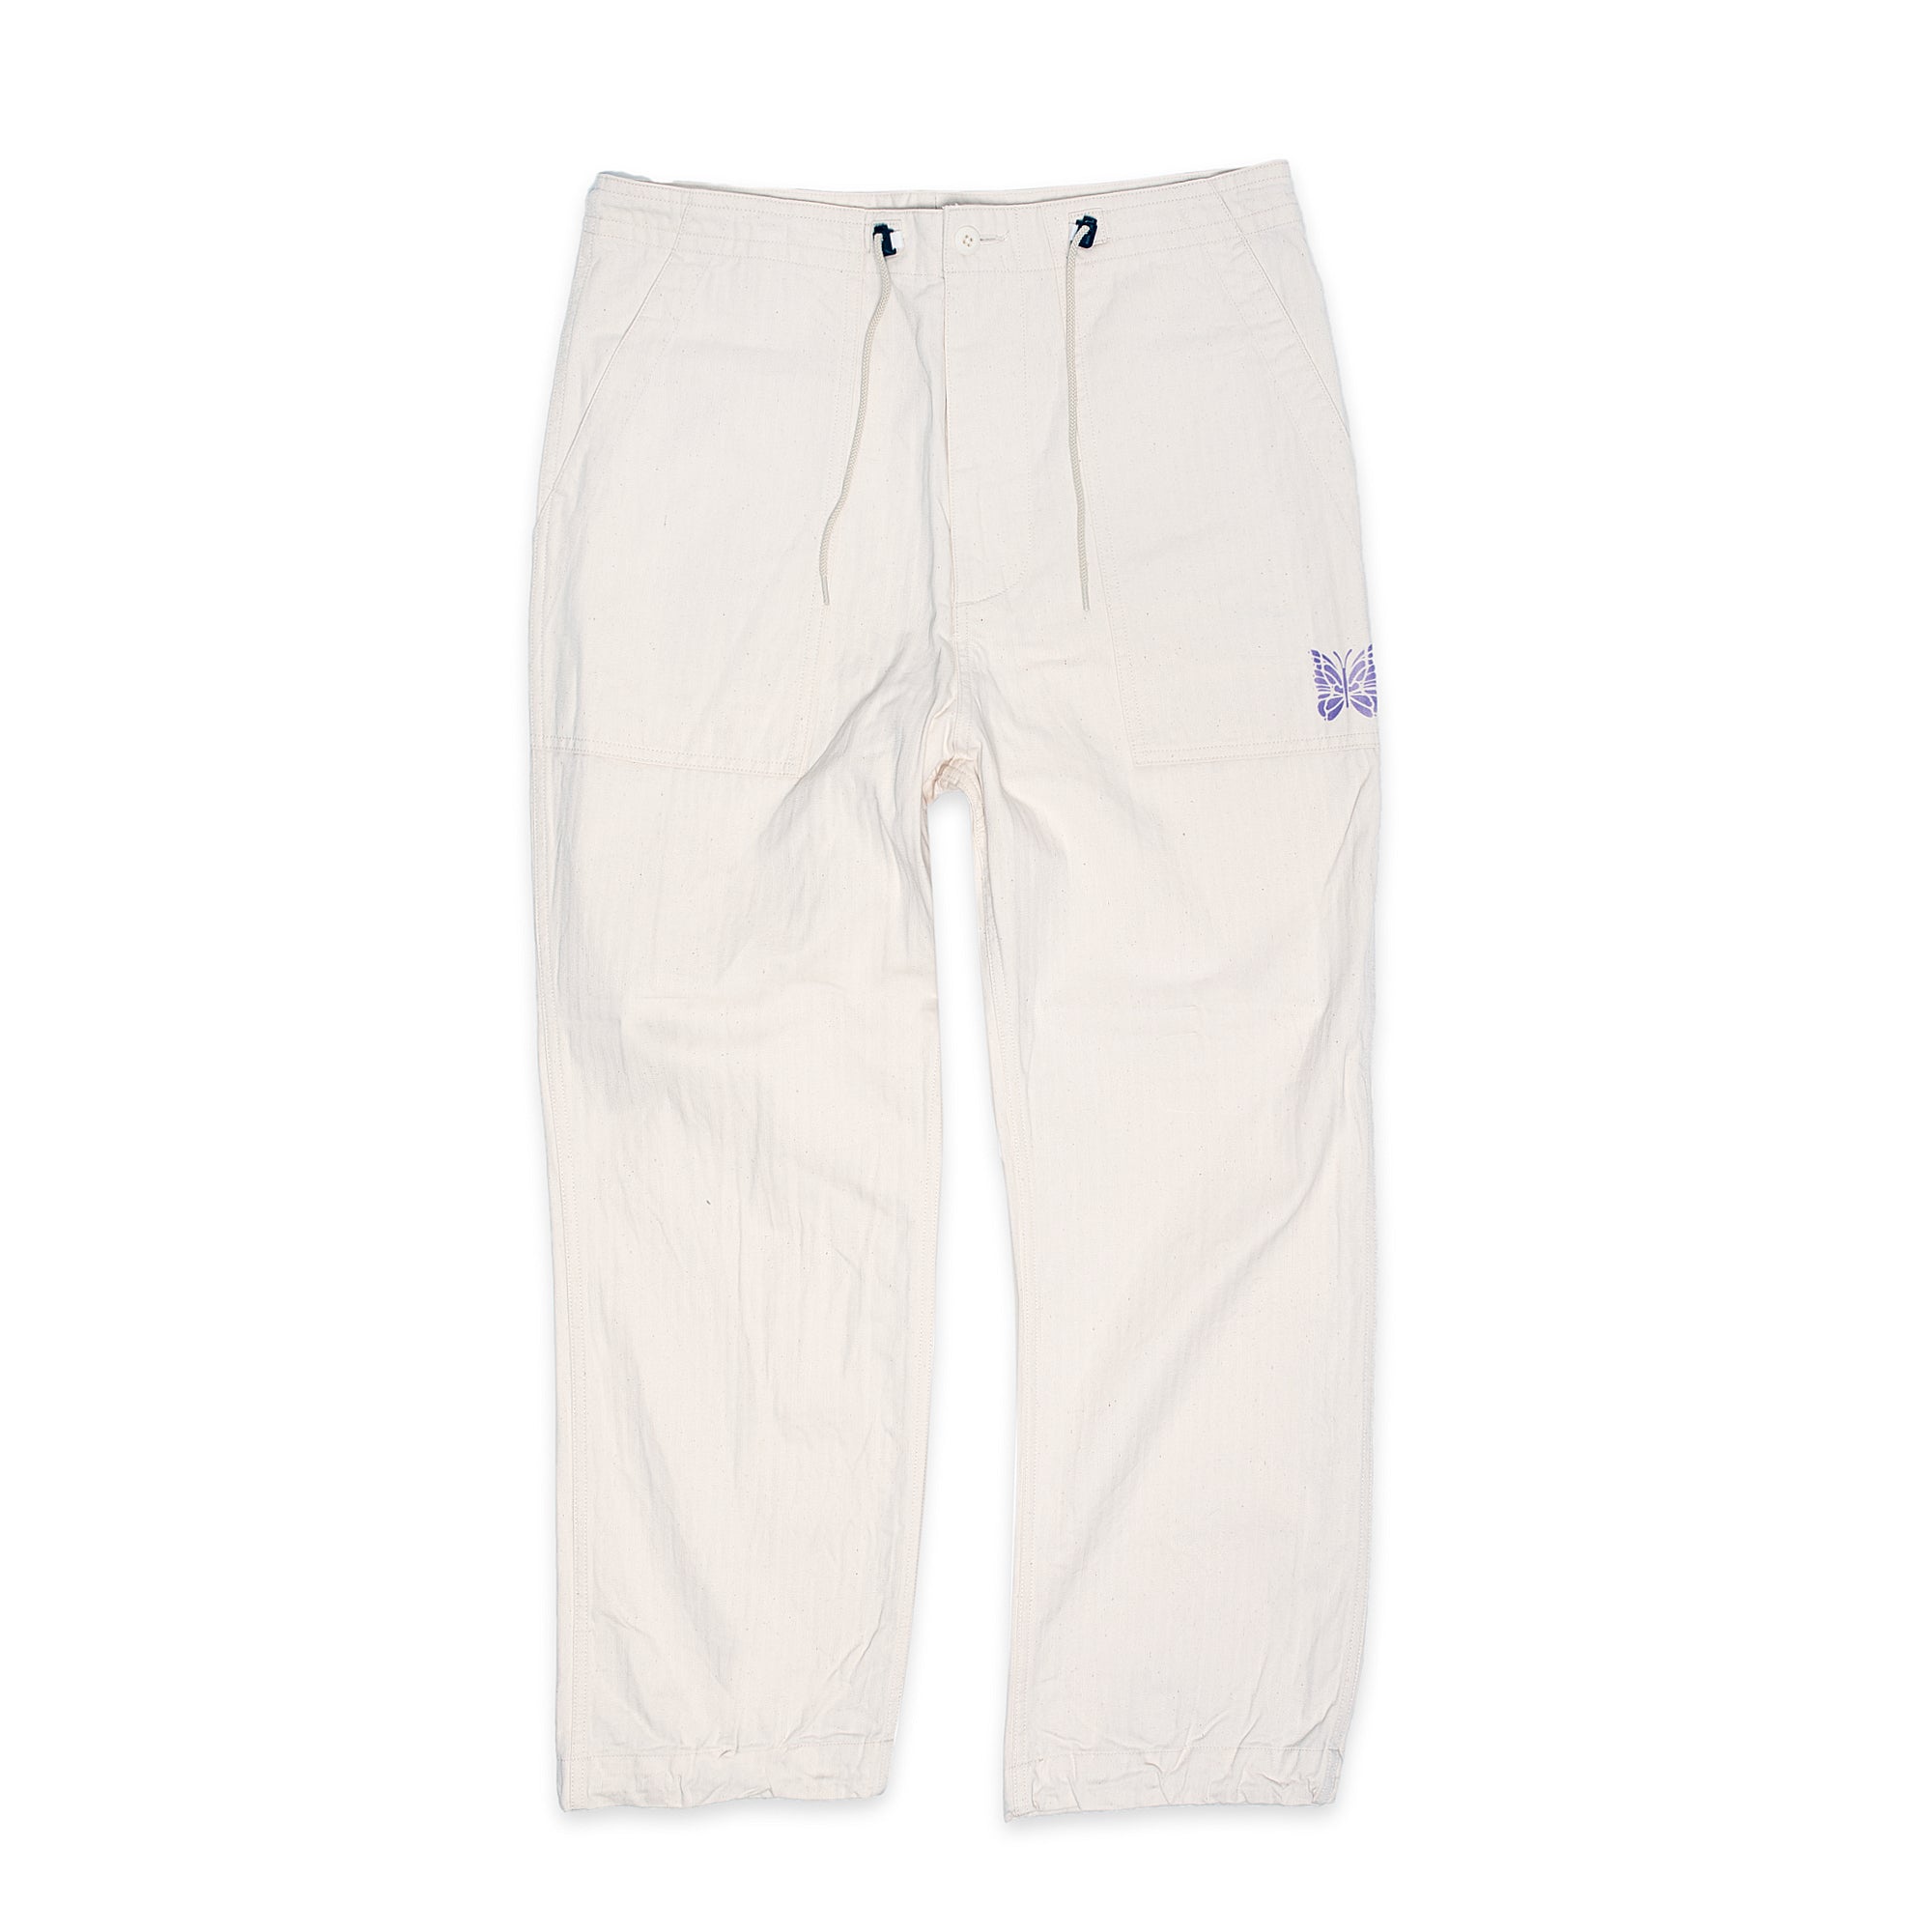 Needles Mens String 'Off White' Fatigue Pants – Extra Butter